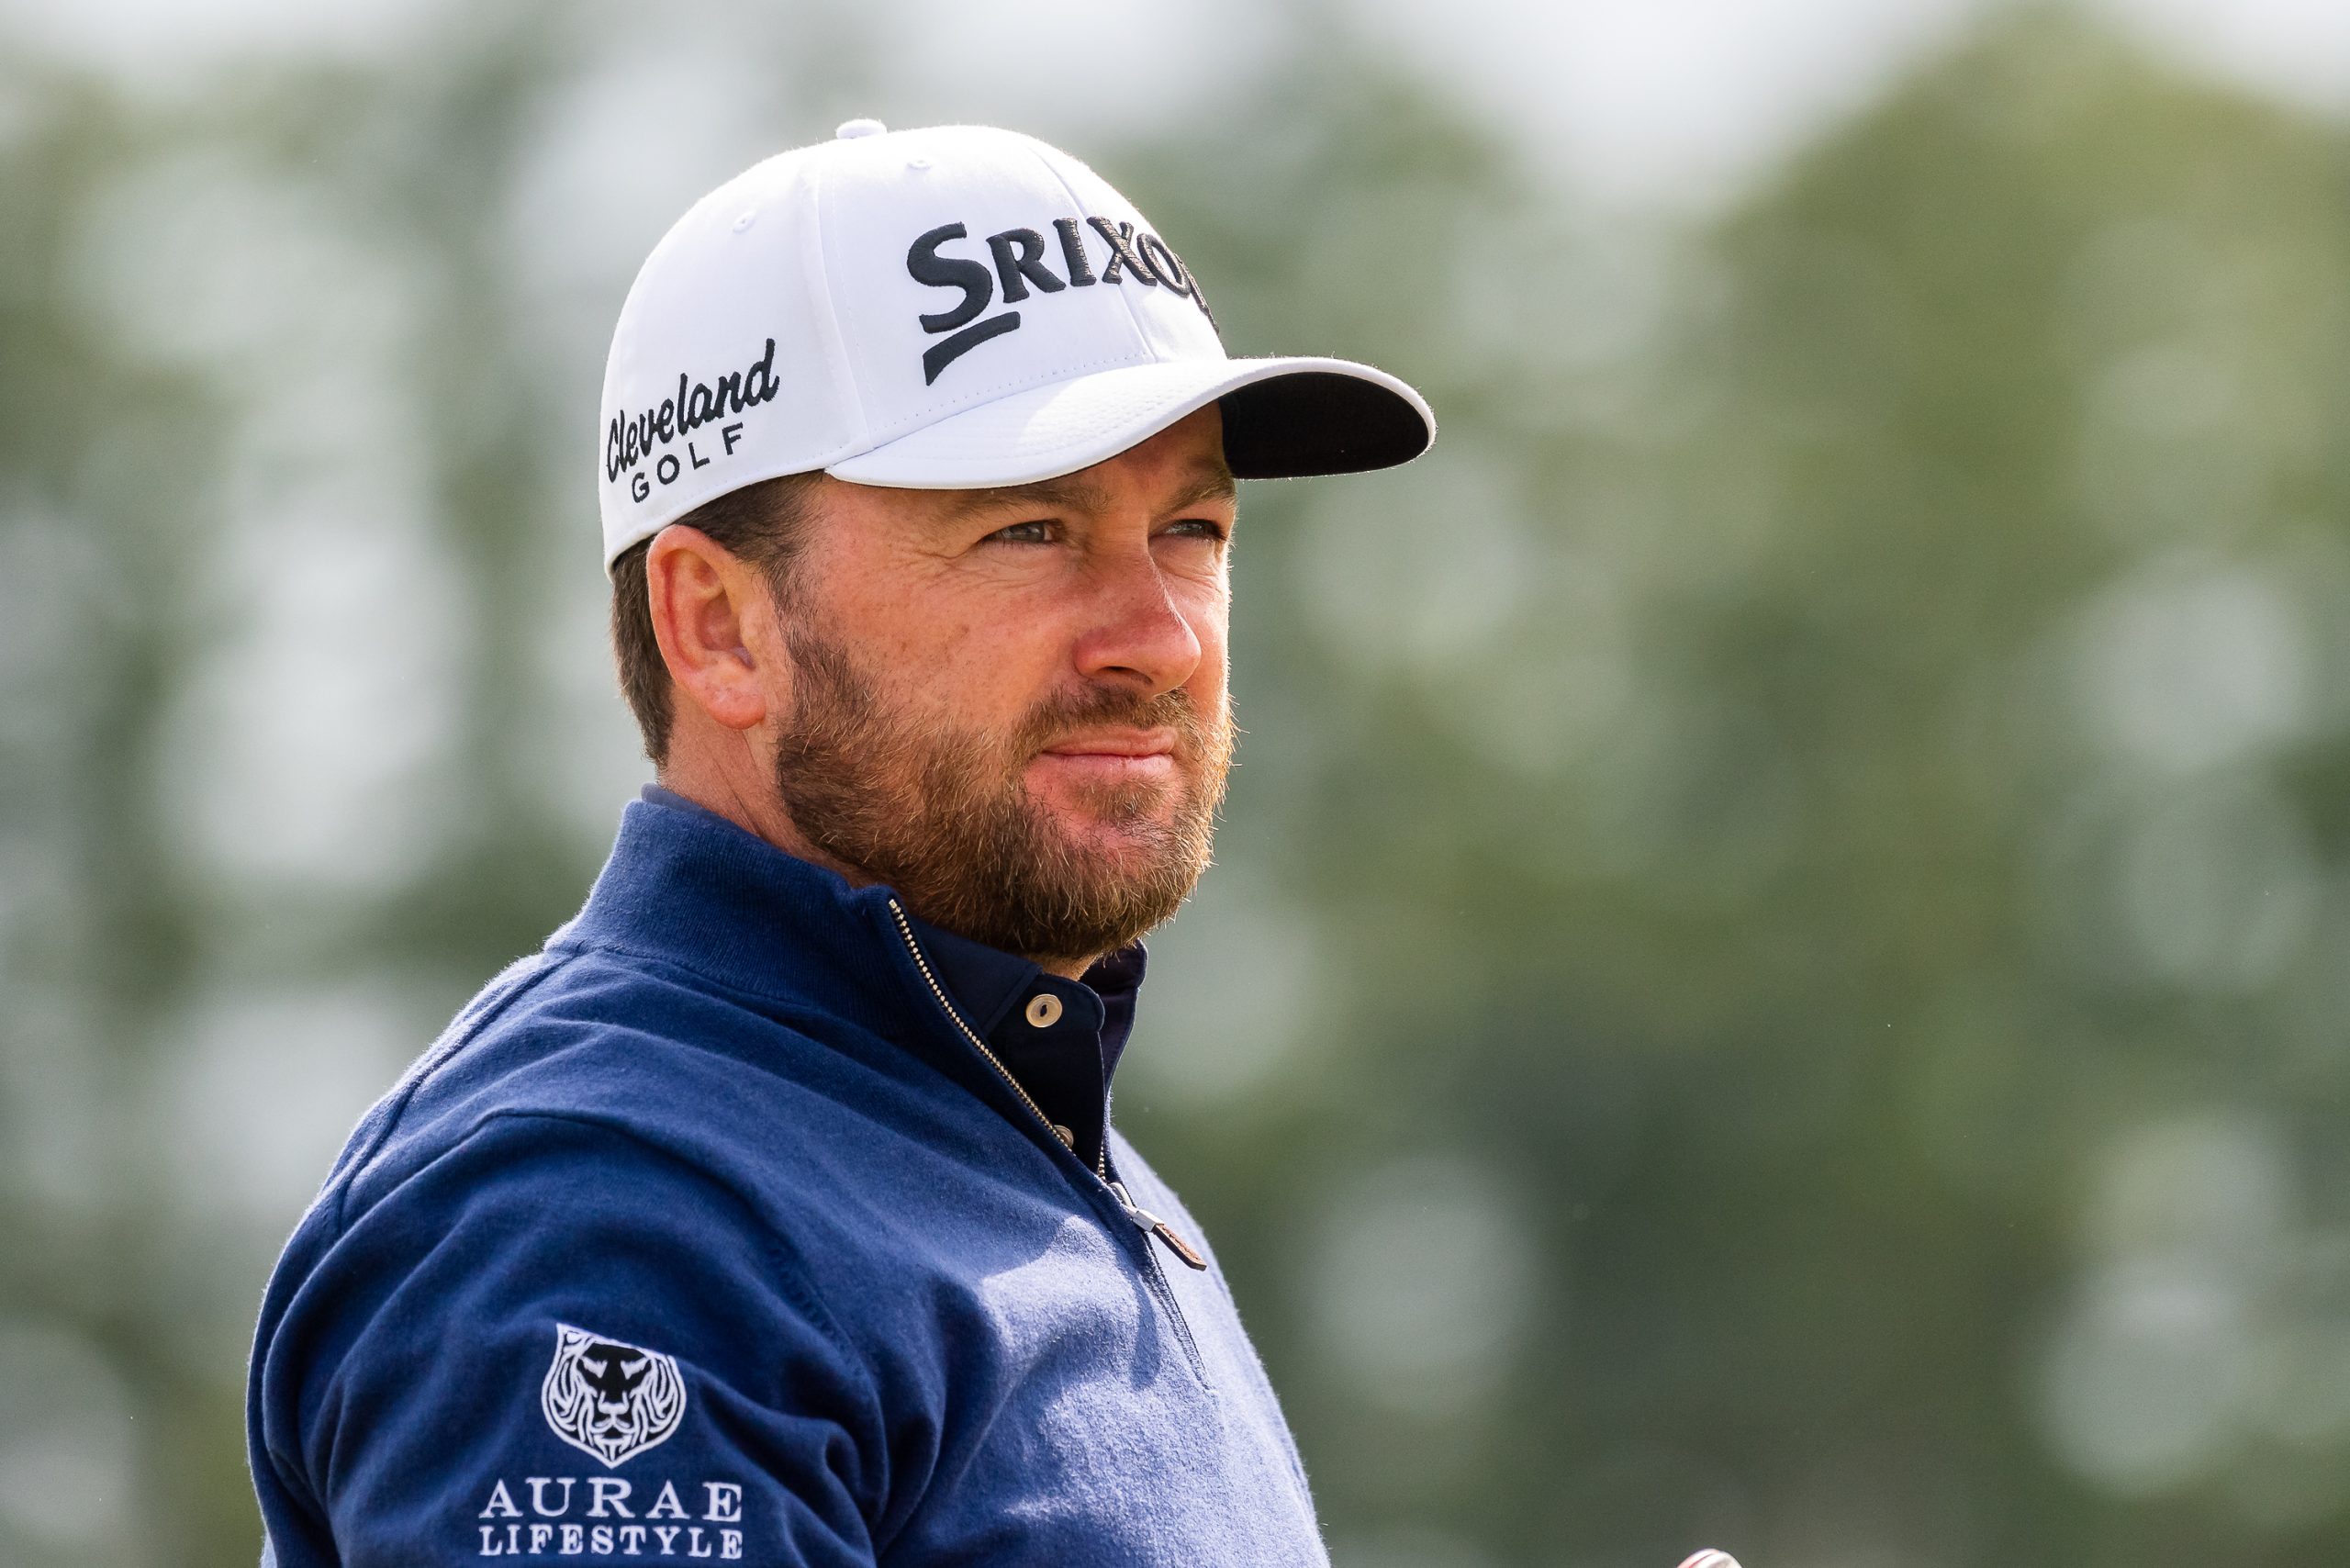 Golf star McDowell steps up his whiskey game